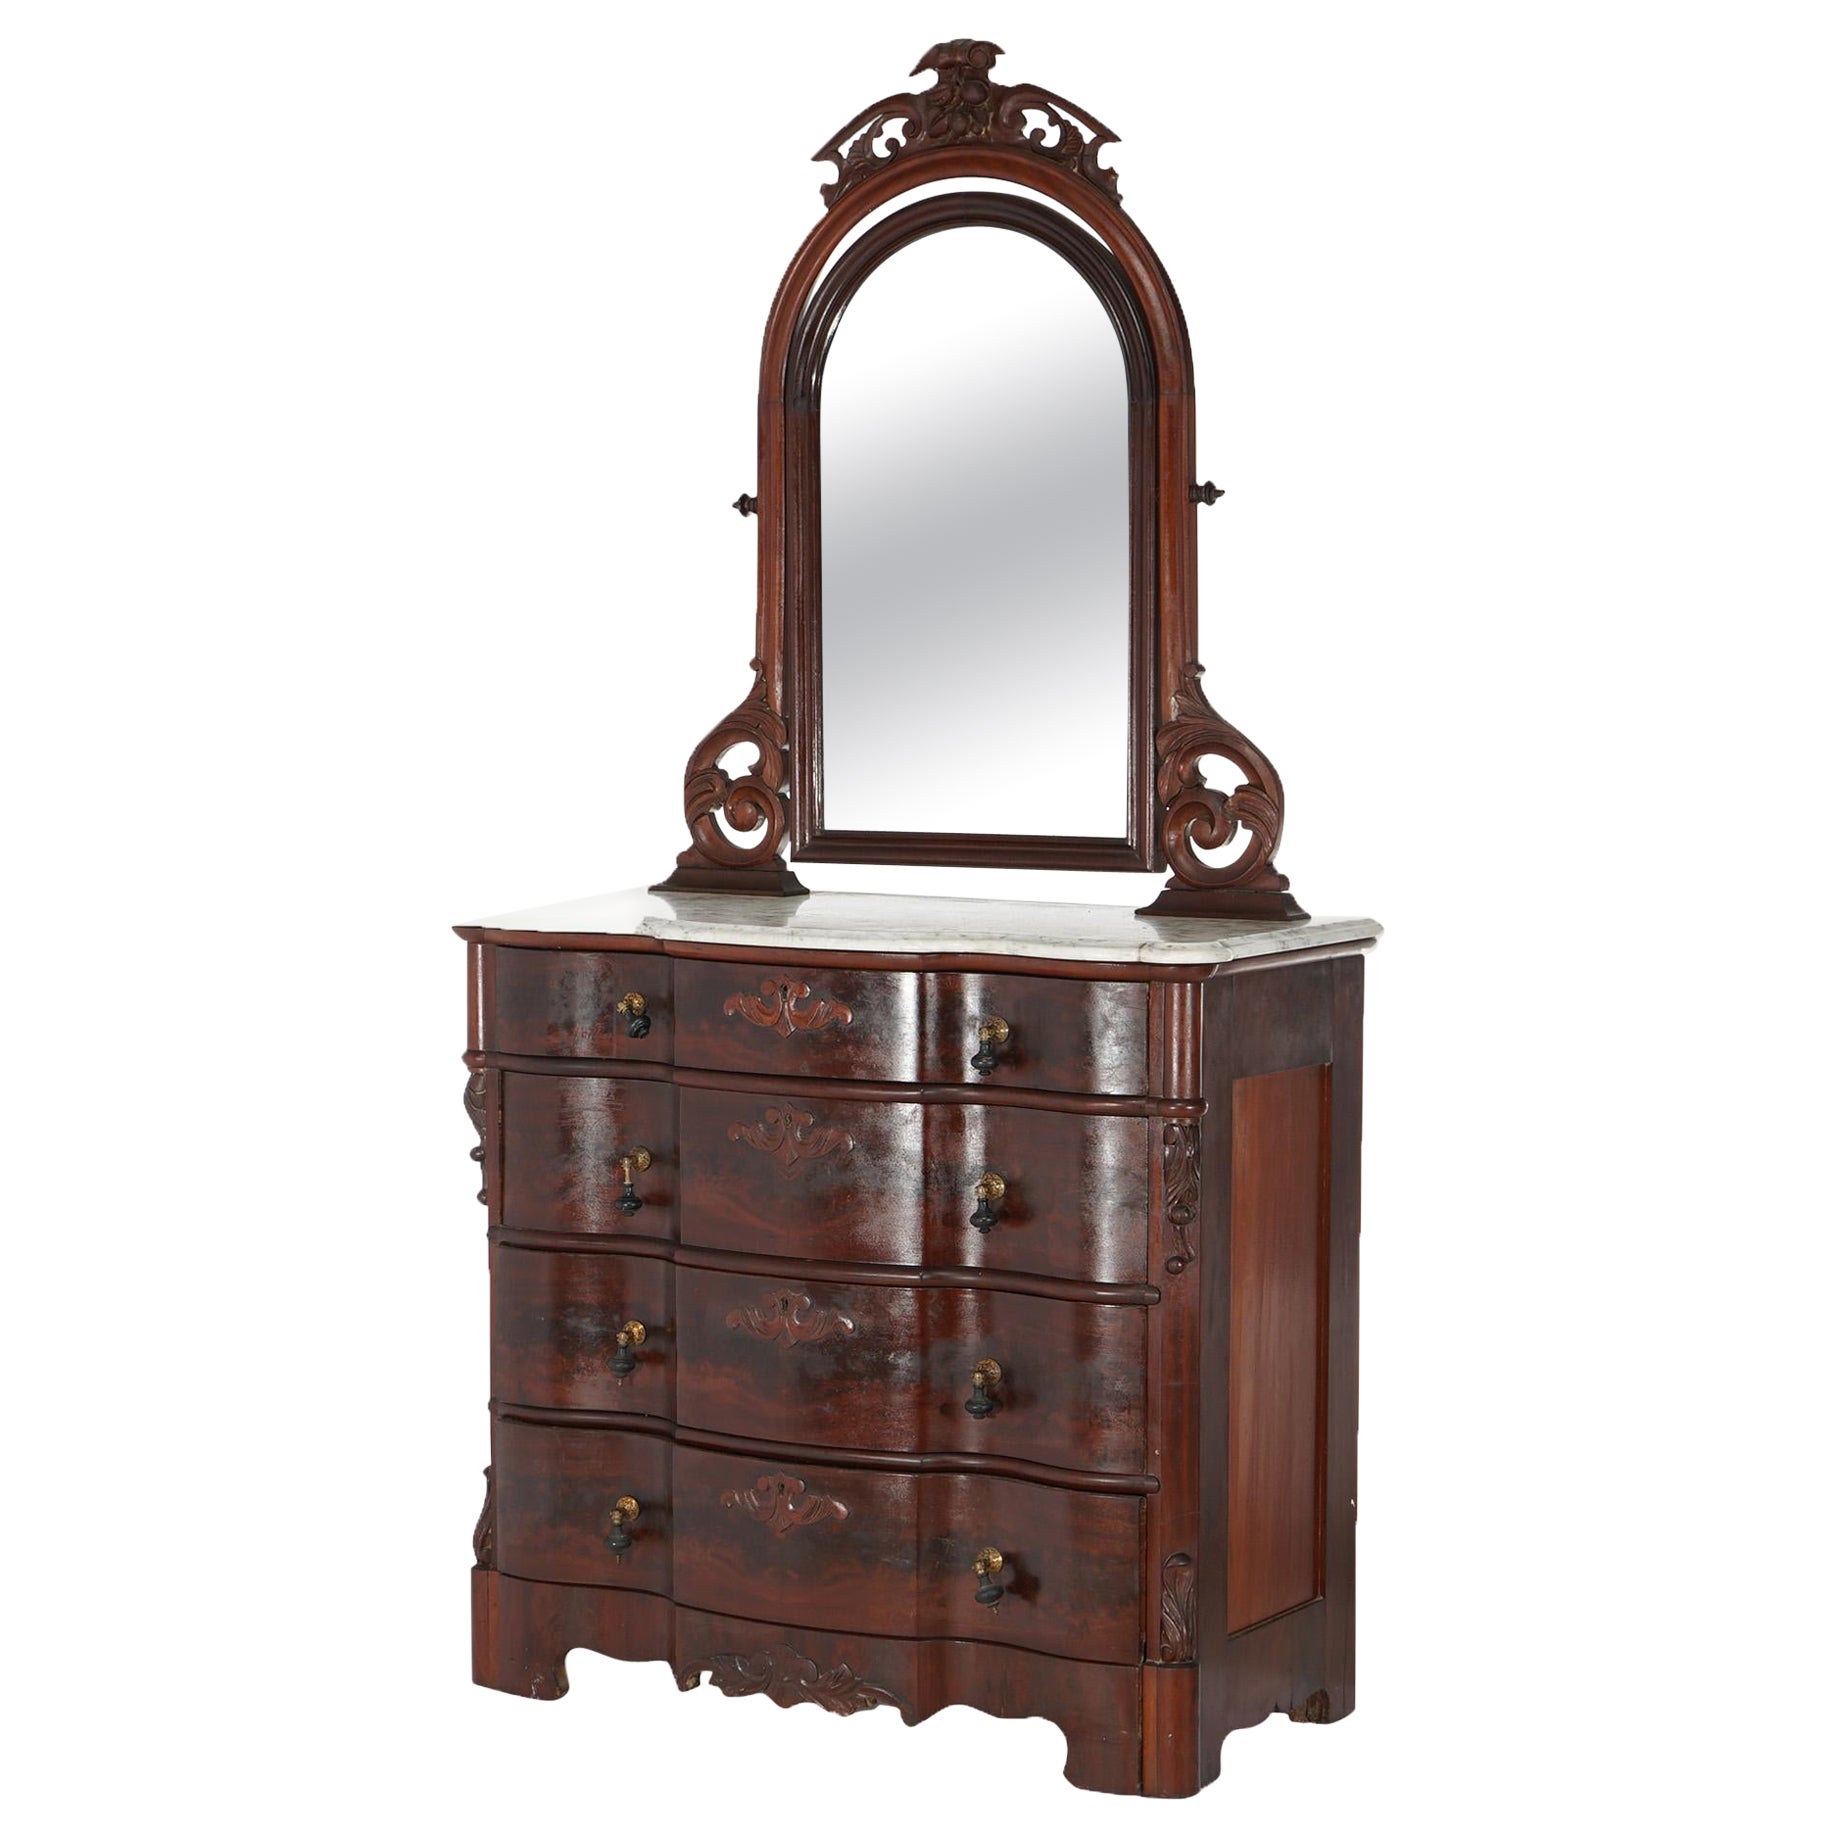 Antique Victorian Flame Mahogany Swell Front Mirrored Chest of Drawers c1860 For Sale